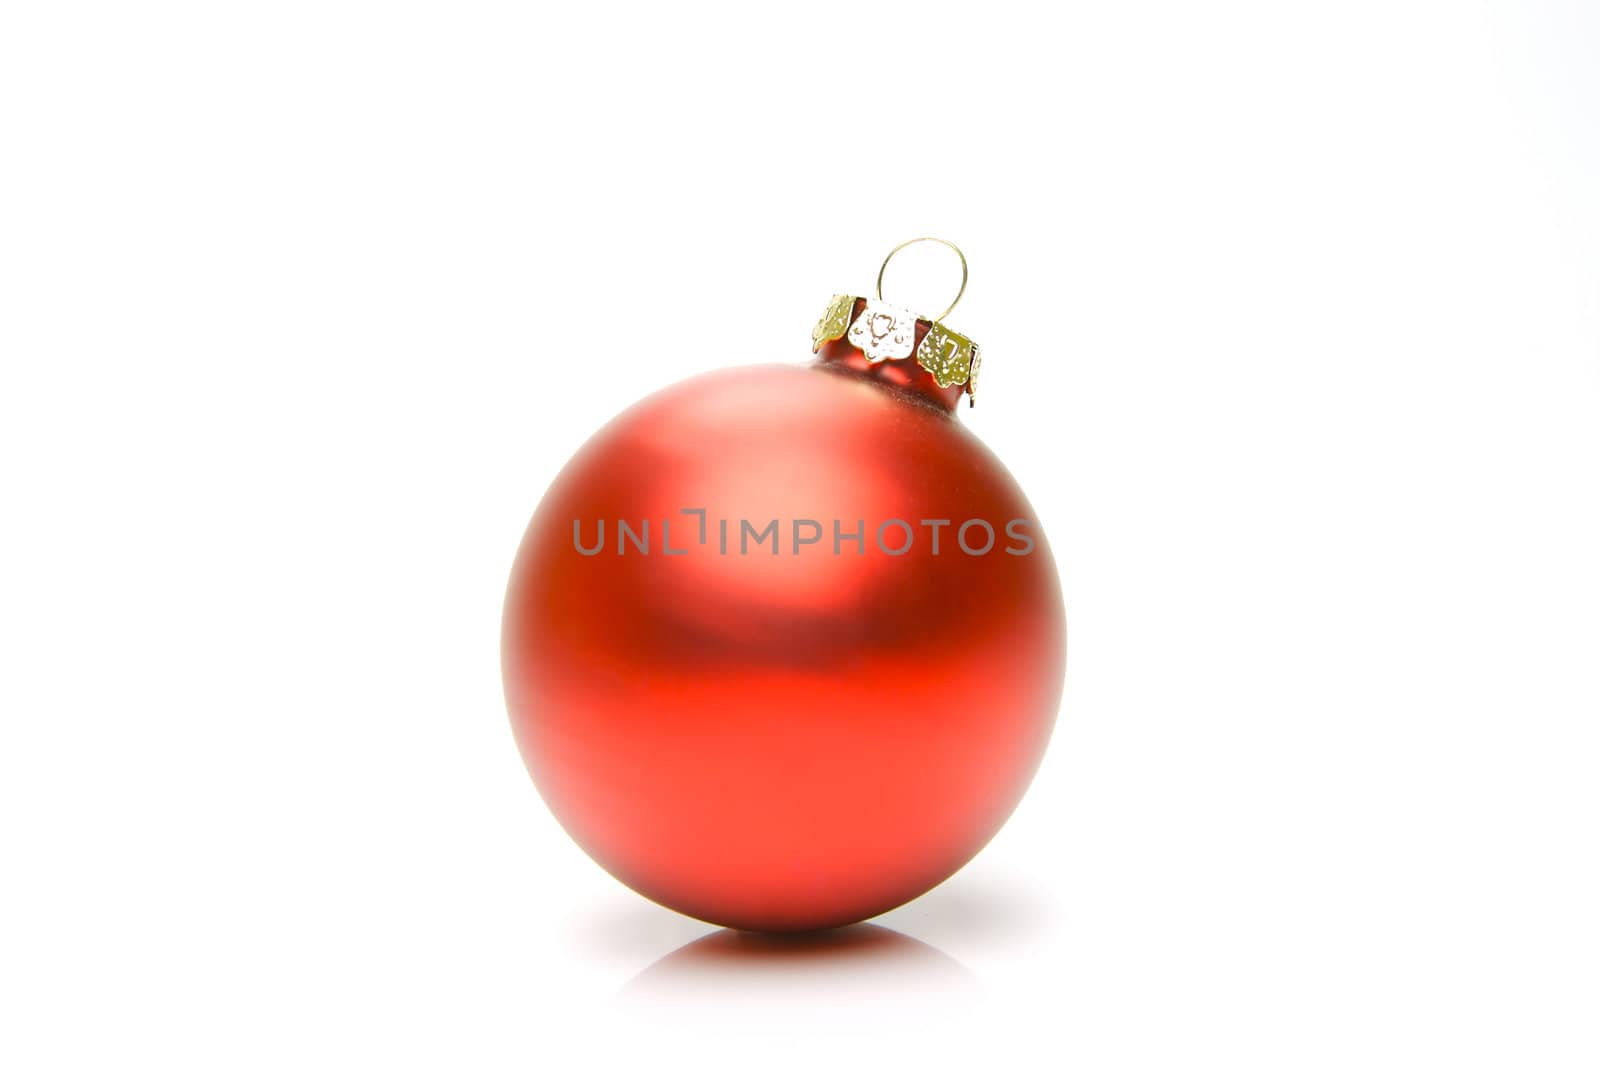 Christmas decorations isolated on a white background